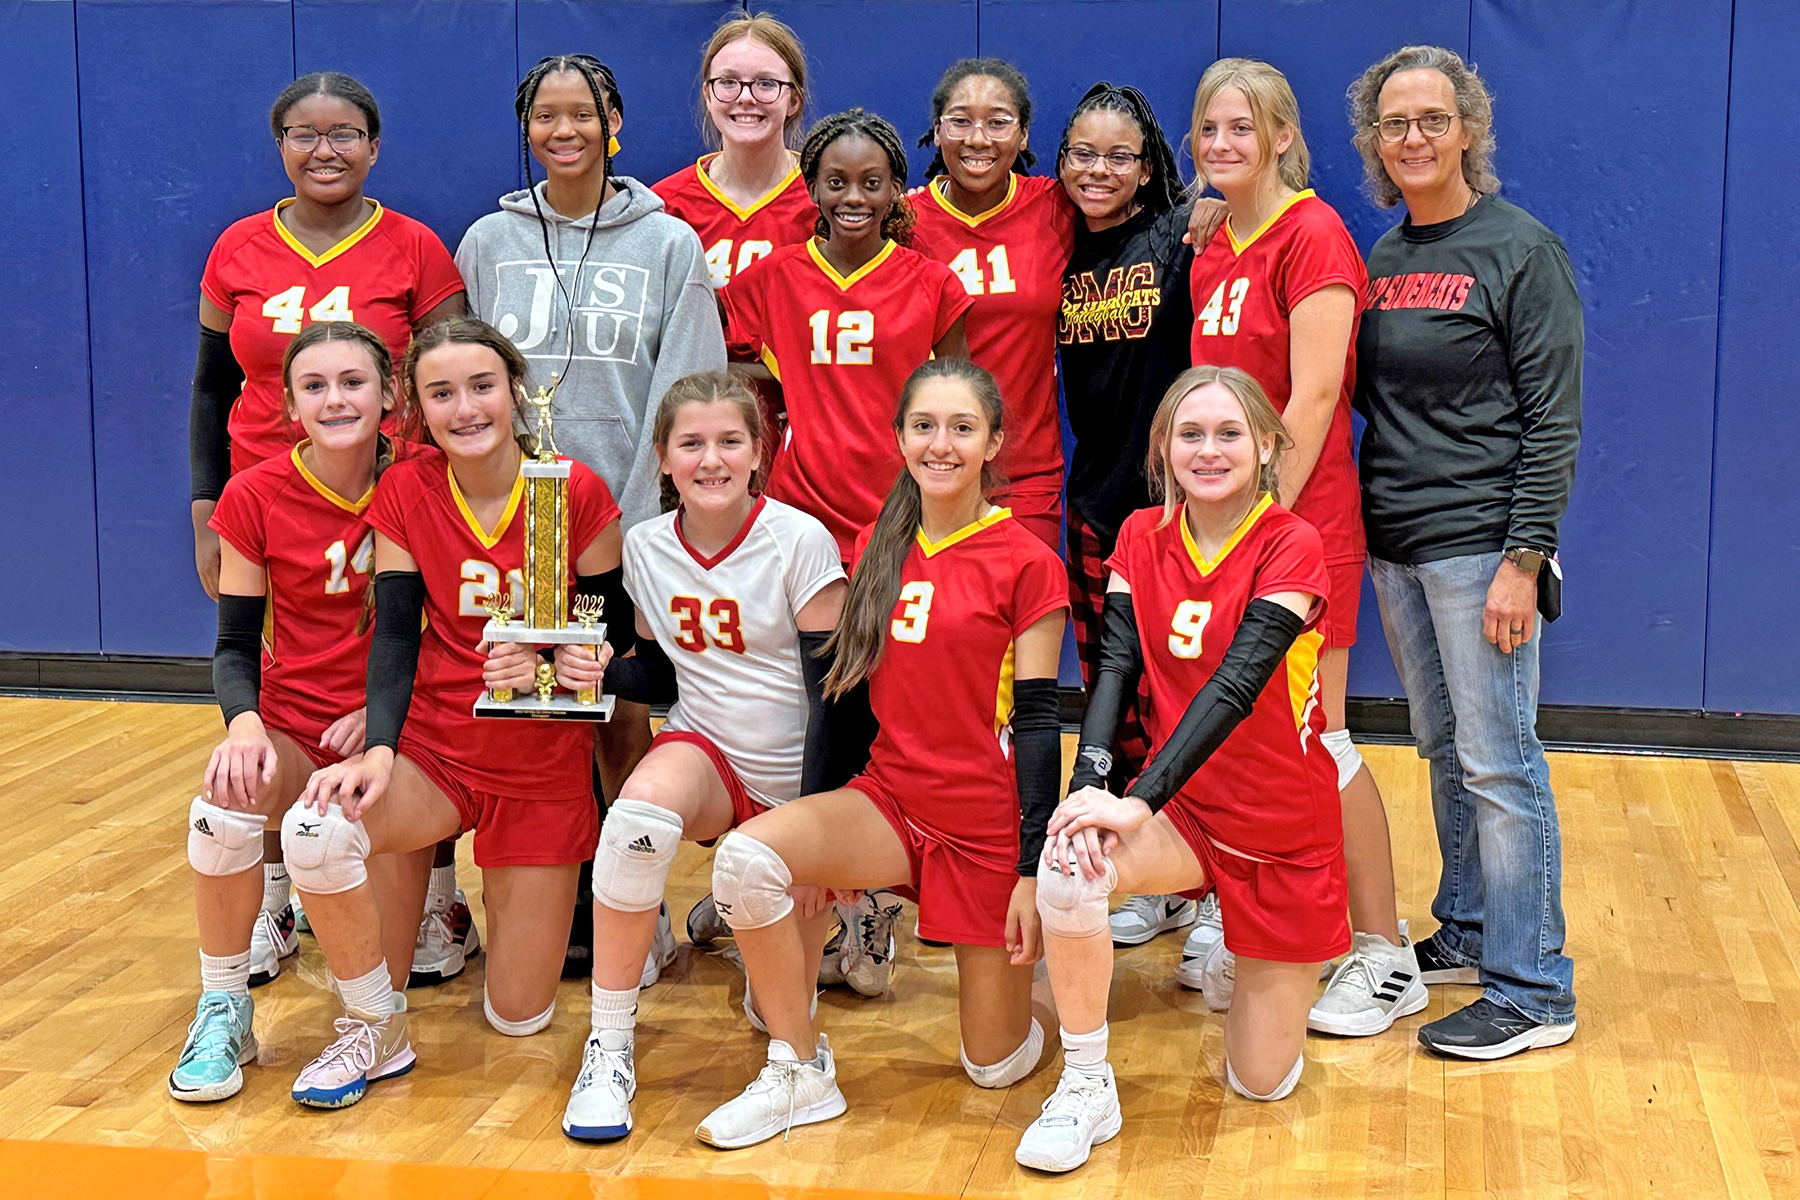 Anthony, Salyards, Smith, Watkins Win Volleyball â€˜Aâ€™ Tournament Titles